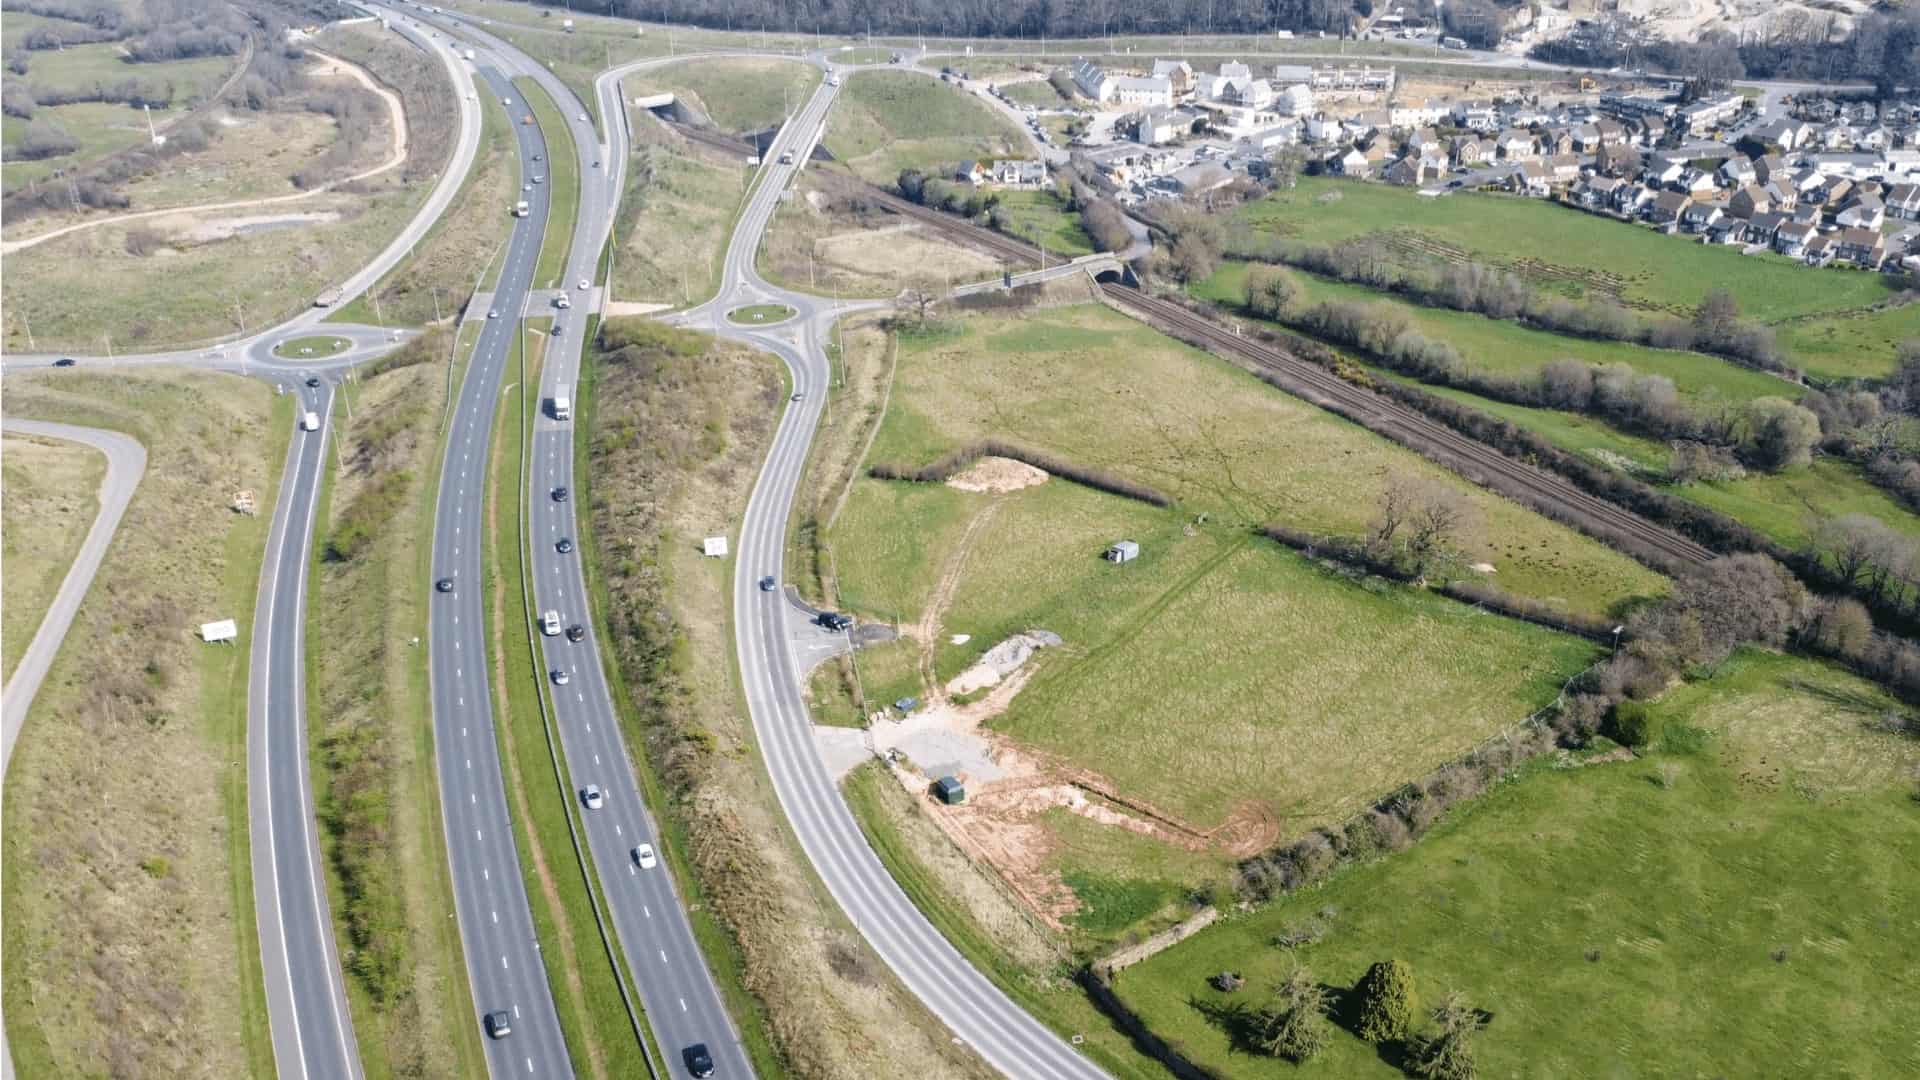 Aerial view of the Oak Tree site in Kingskerswell, showcasing the scenic surroundings. This image provides a perspective of the location for potential development of flexible and sustainable workspaces by Onyx.